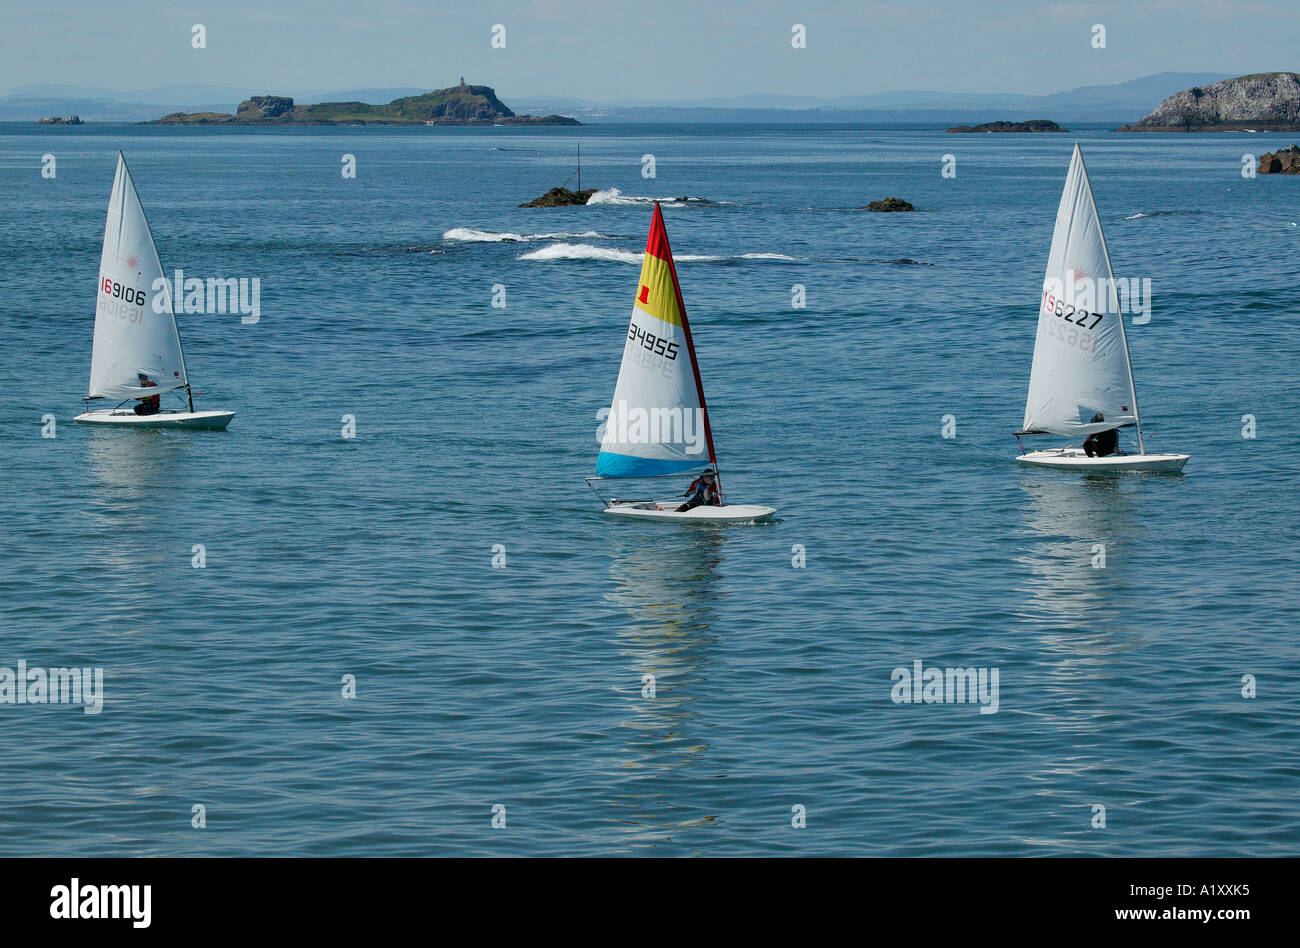 Single handed sailing dinghies sailing in the Forth Estuary, North Berwick, Scotland, UK G B, Europe, Stock Photo